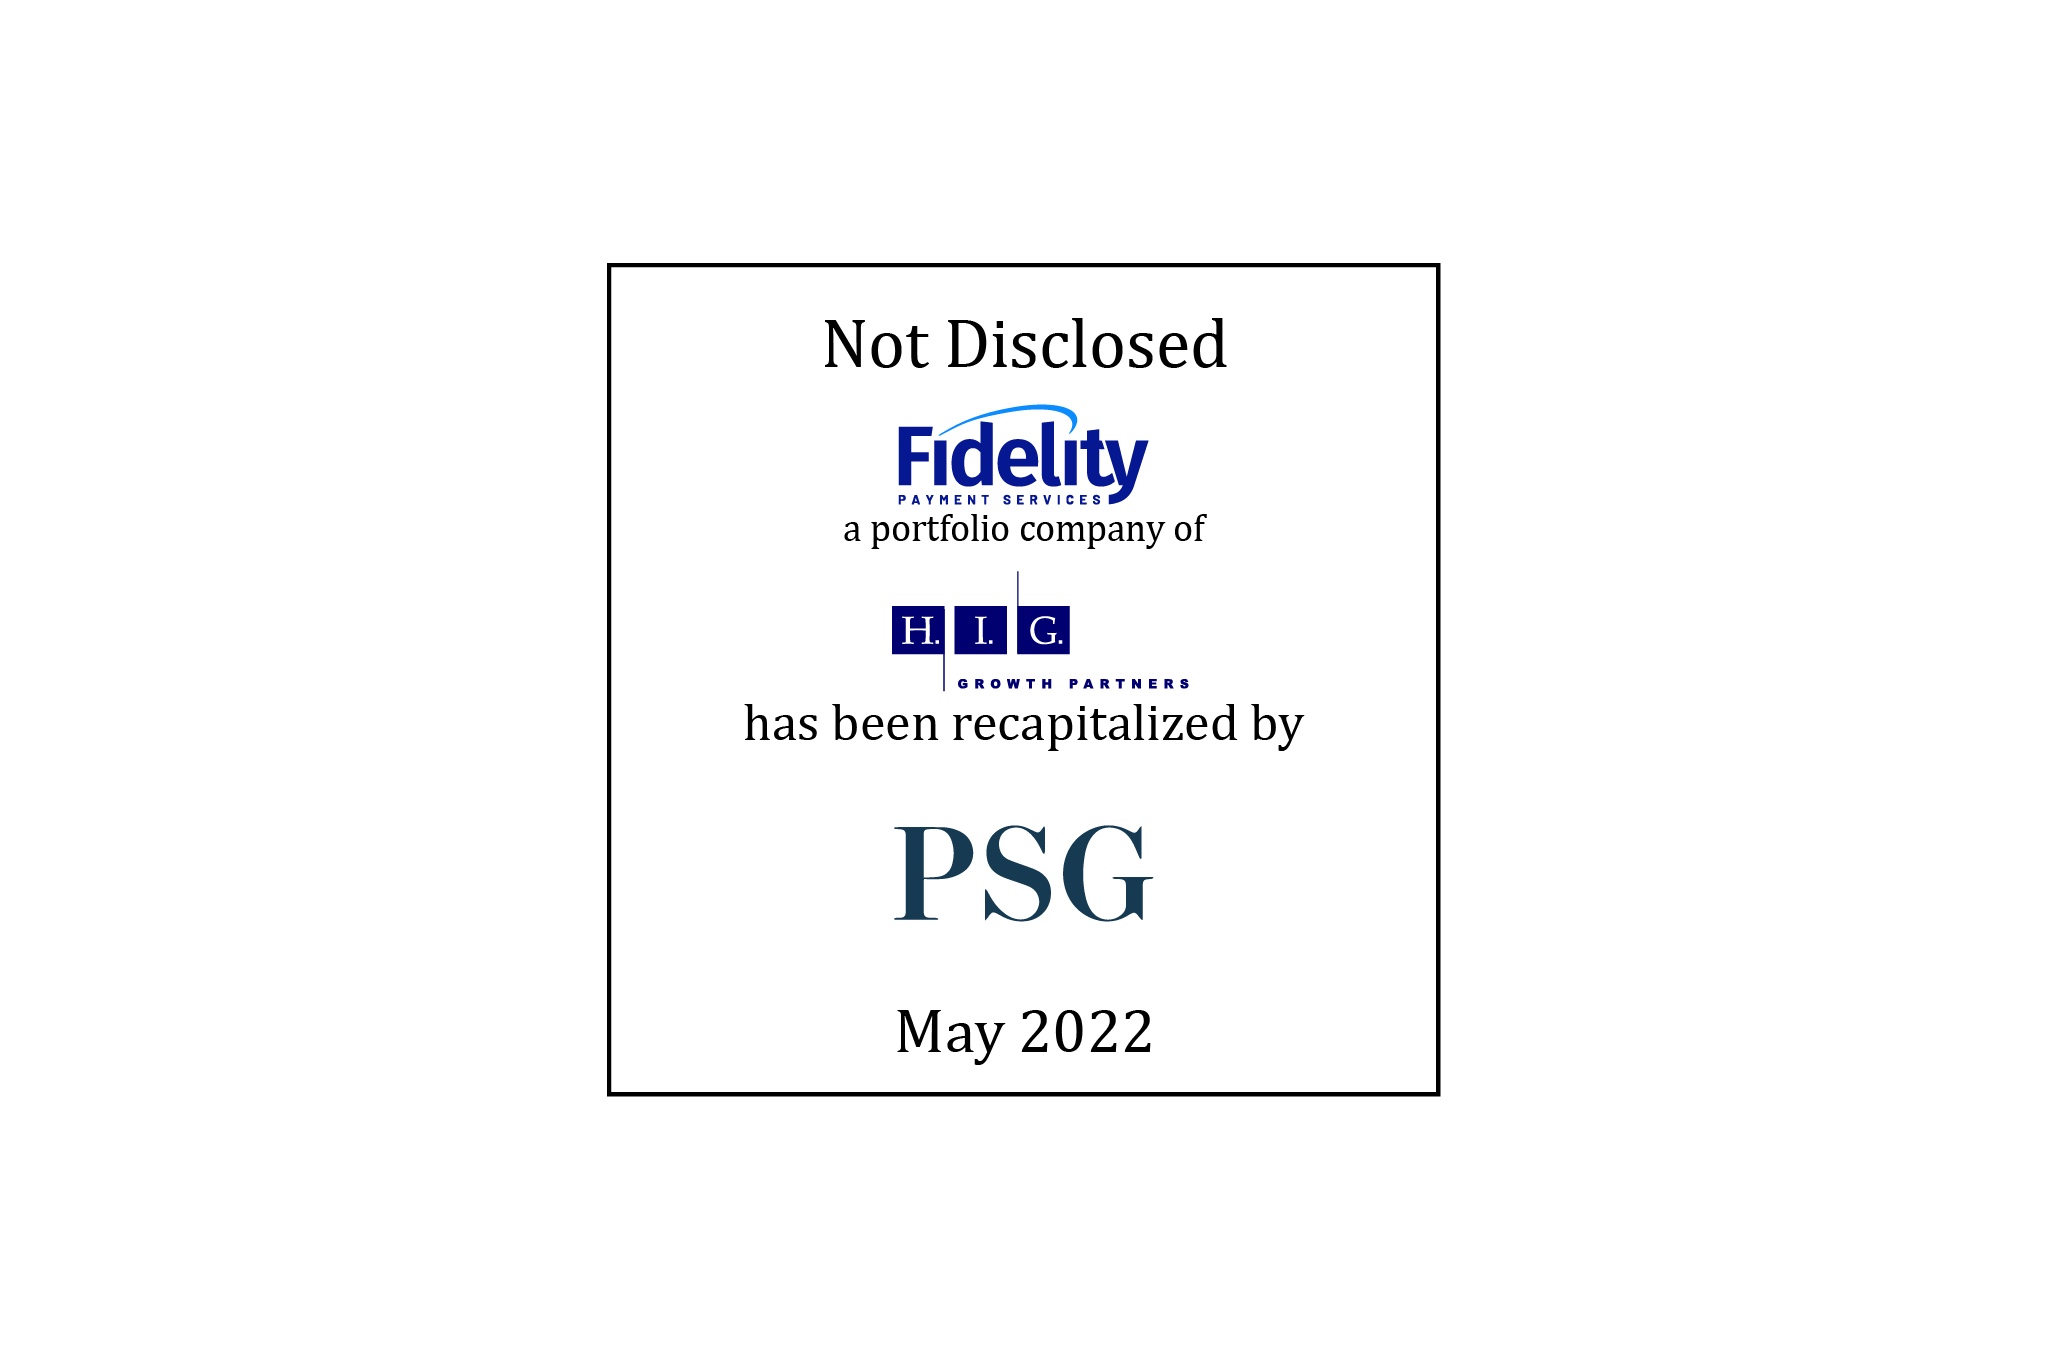 Not Disclosed, Fidelity Payment Services, a portfolio company of HIG Growth Partners, has been recapitalized by PSG, May 2022